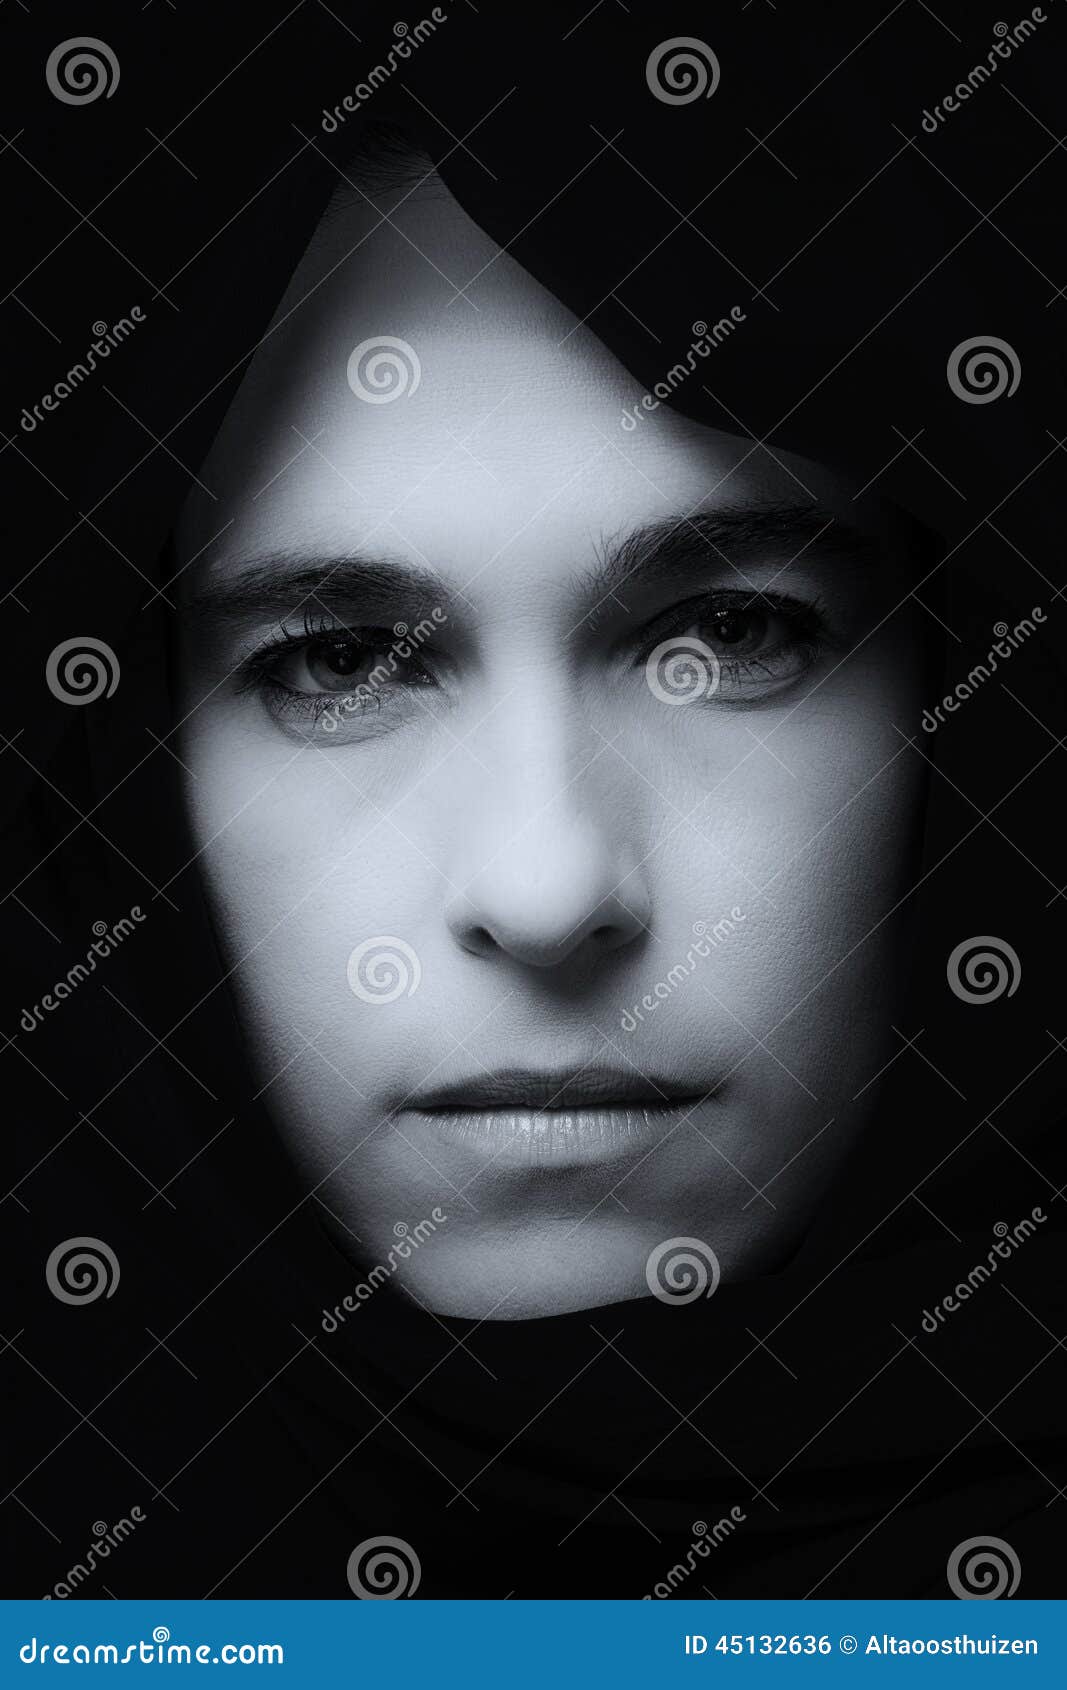 Middle Eastern Woman Portrait Looking Sad With Blue Hijab Artist Stock 